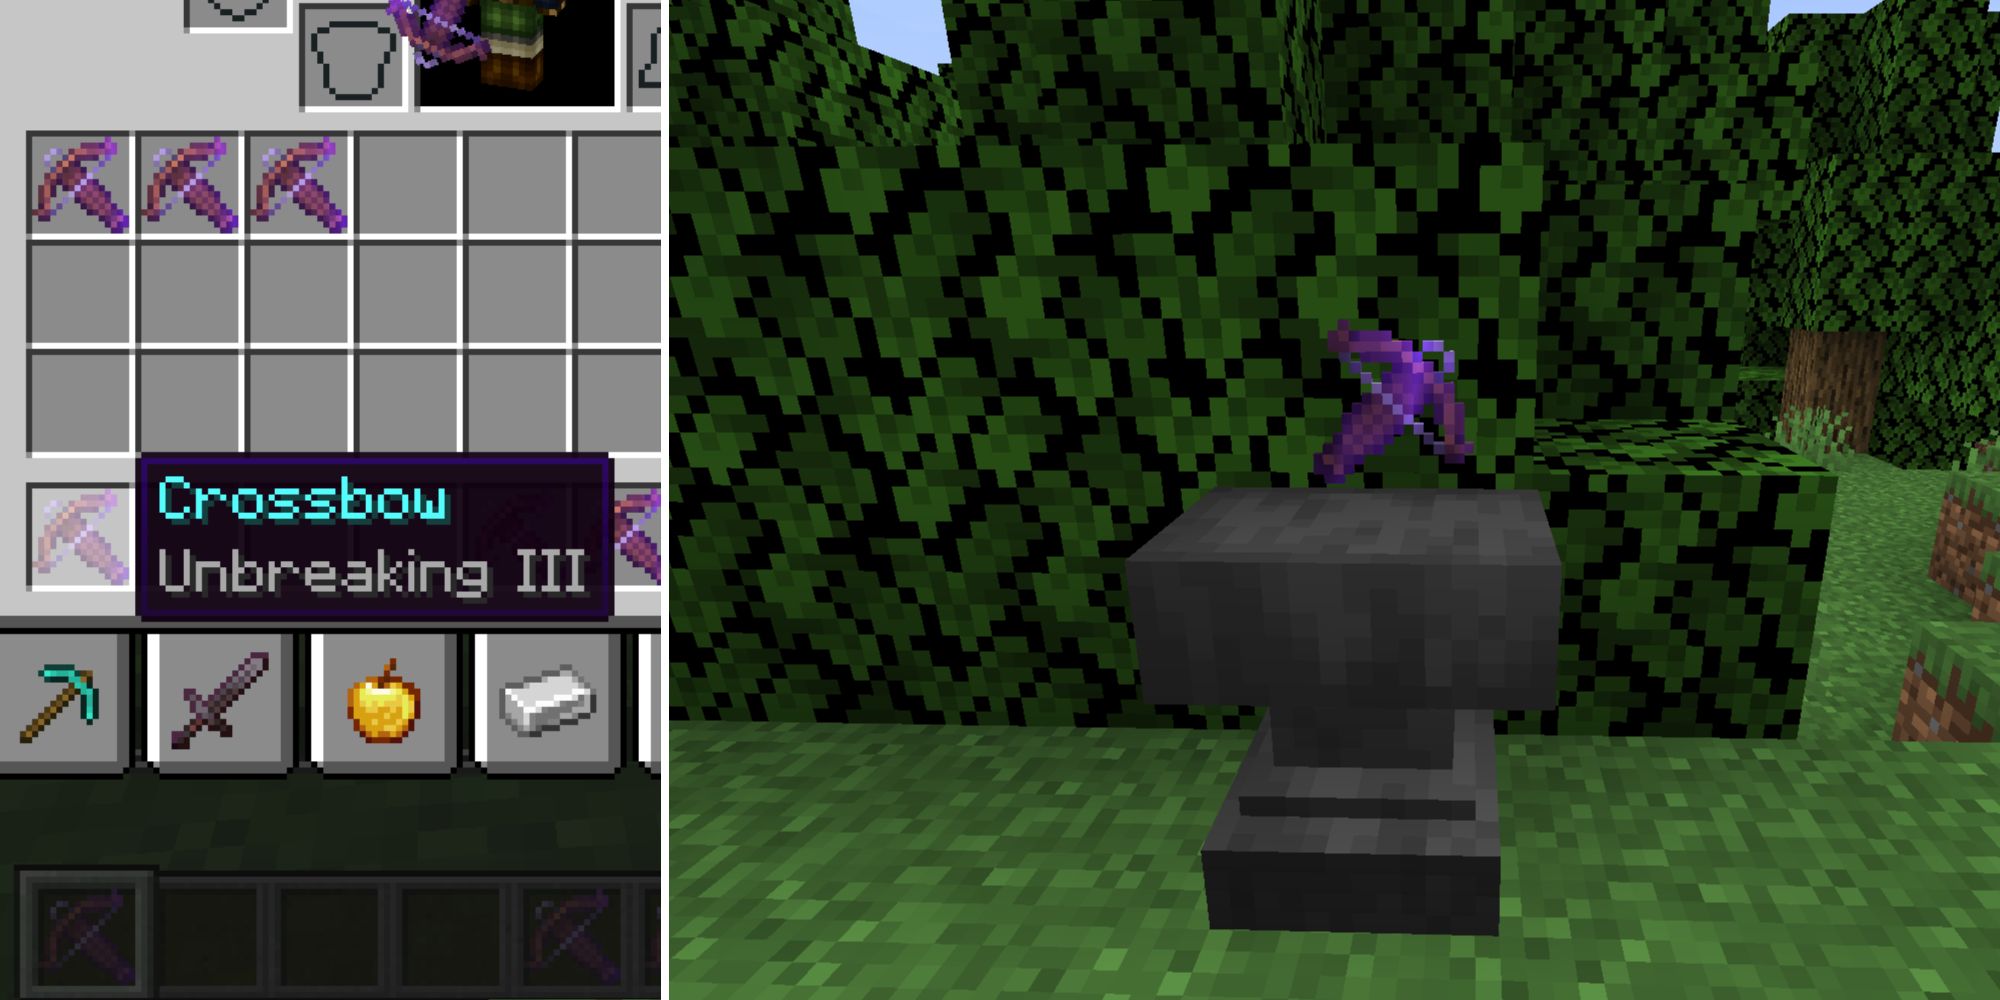 A crossbow enchanted with Unbreaking and a crossbow on top of an anvil